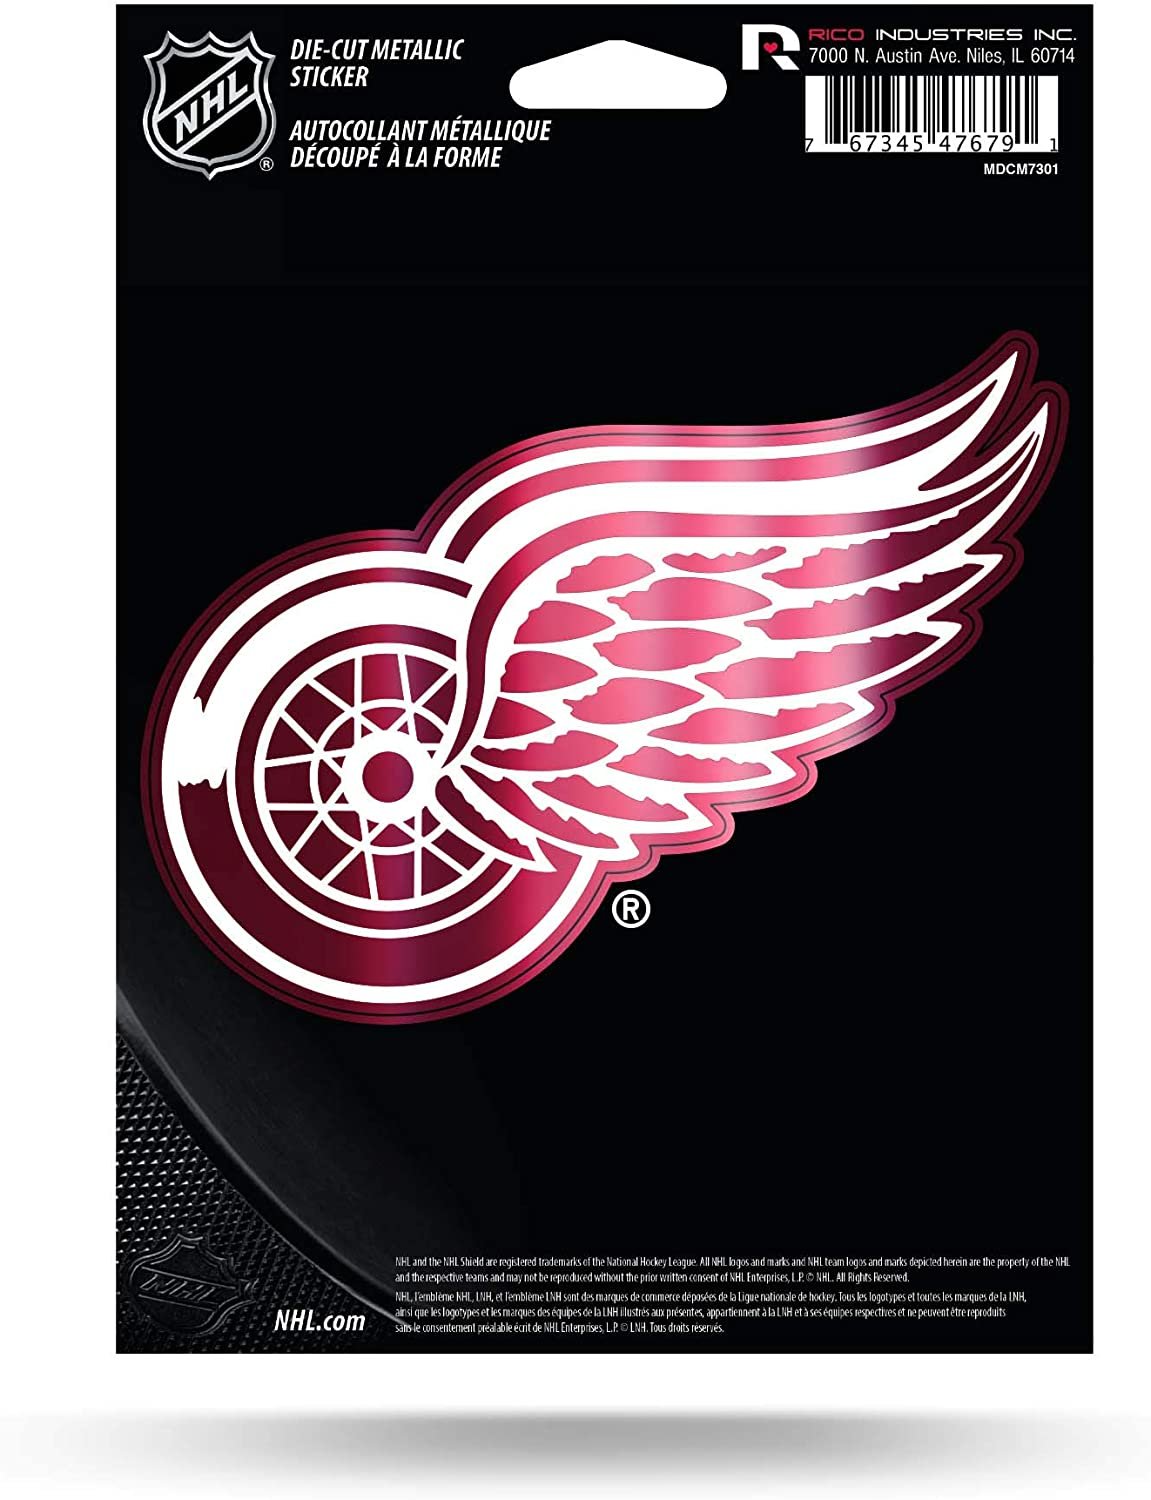 Detroit Red Wings 5 Inch Sticker Decal Shape Cut Shimmer Metallic Design Full Adhesive Backing